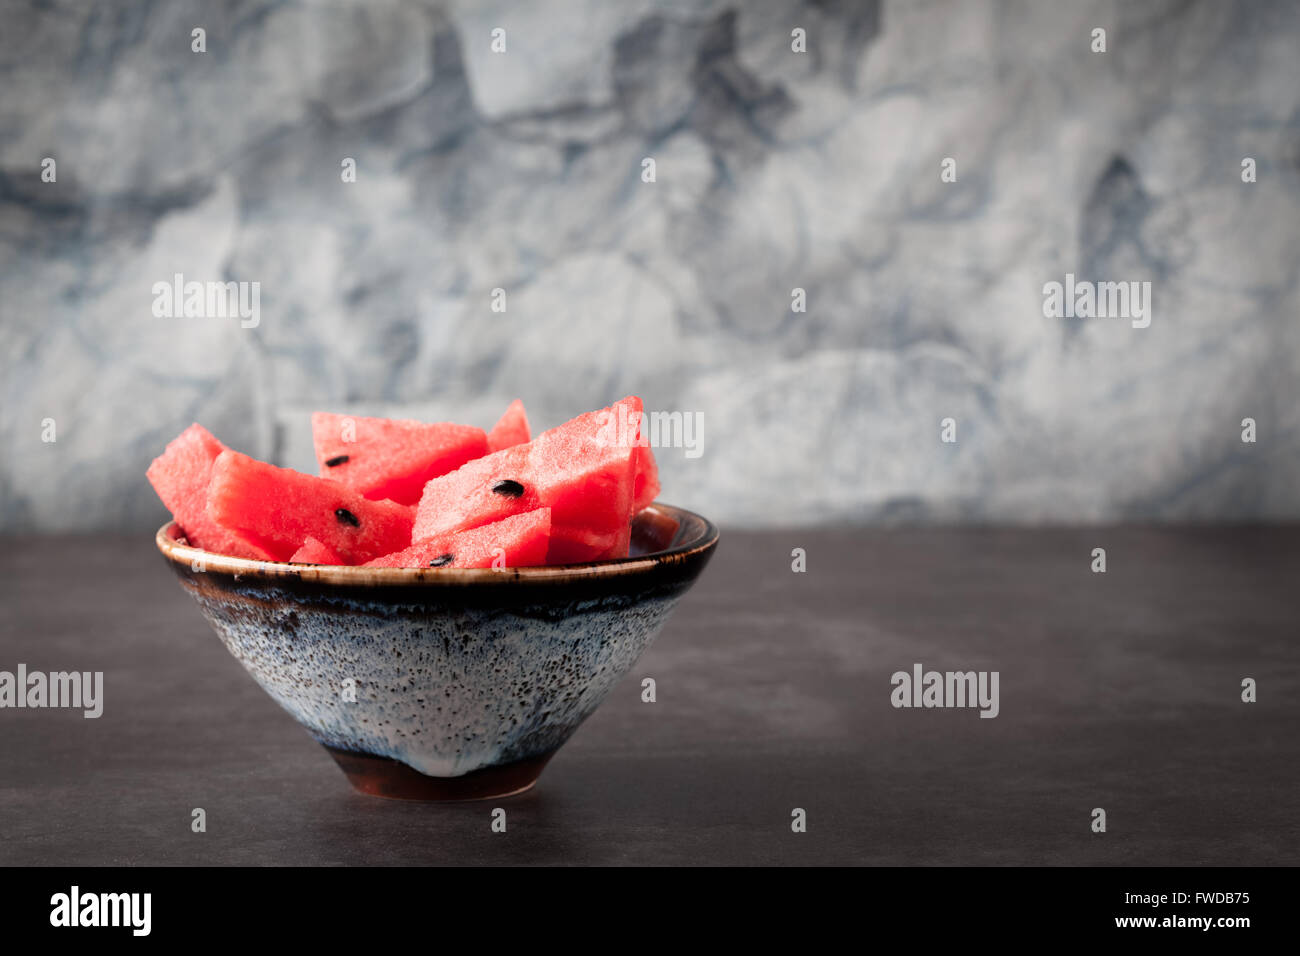 Sliced watermelon in handmade ceramic bowl on blurred  background with copy space. Shallow depth of field. Stock Photo